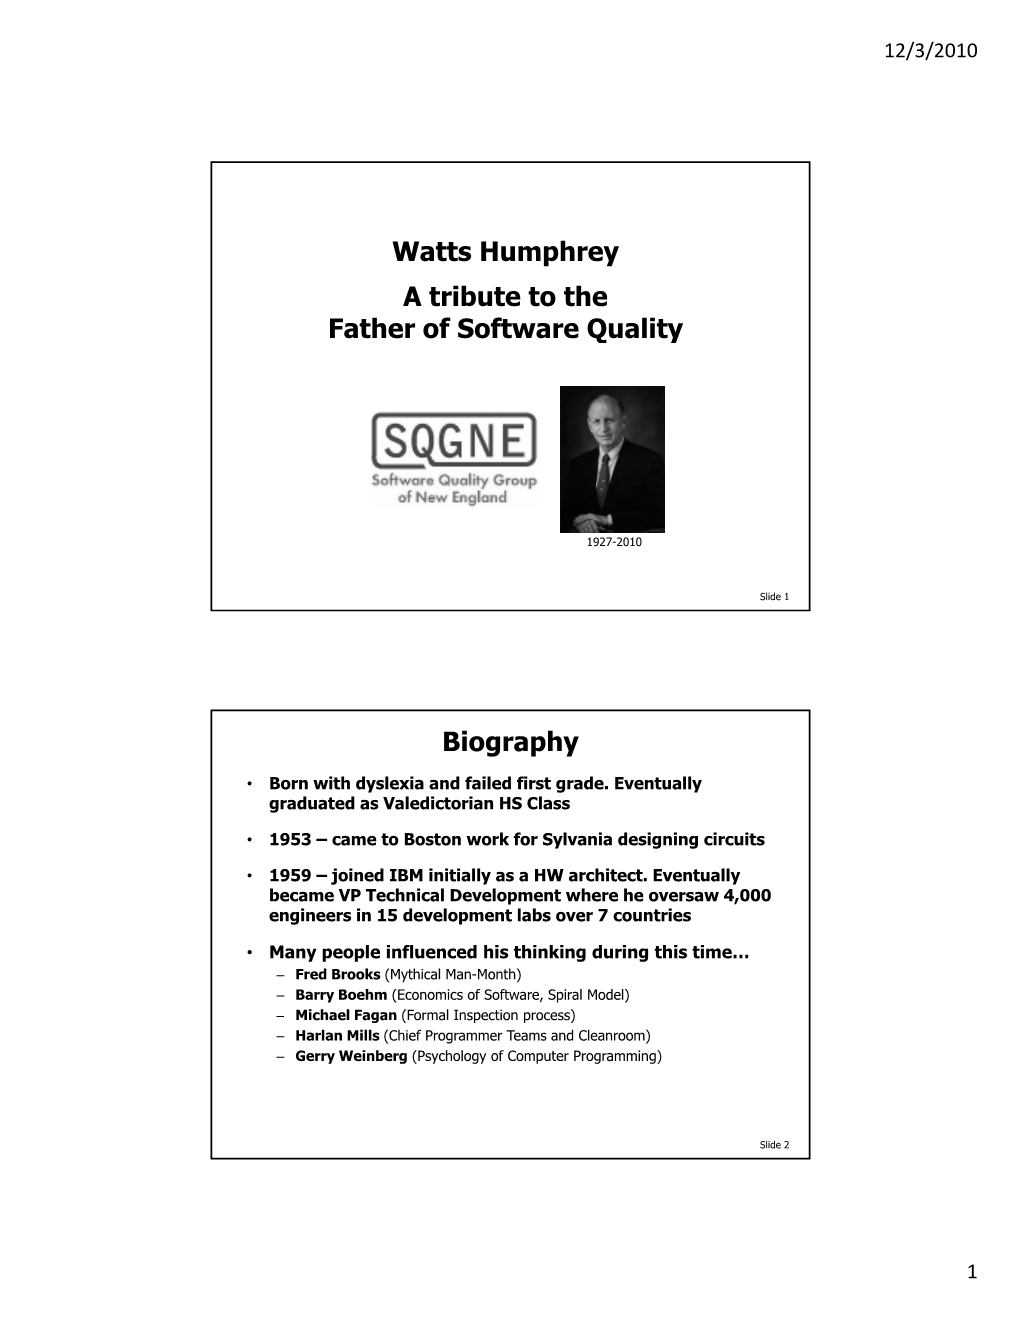 Watts Humphrey a Tribute to the Father of Software Quality